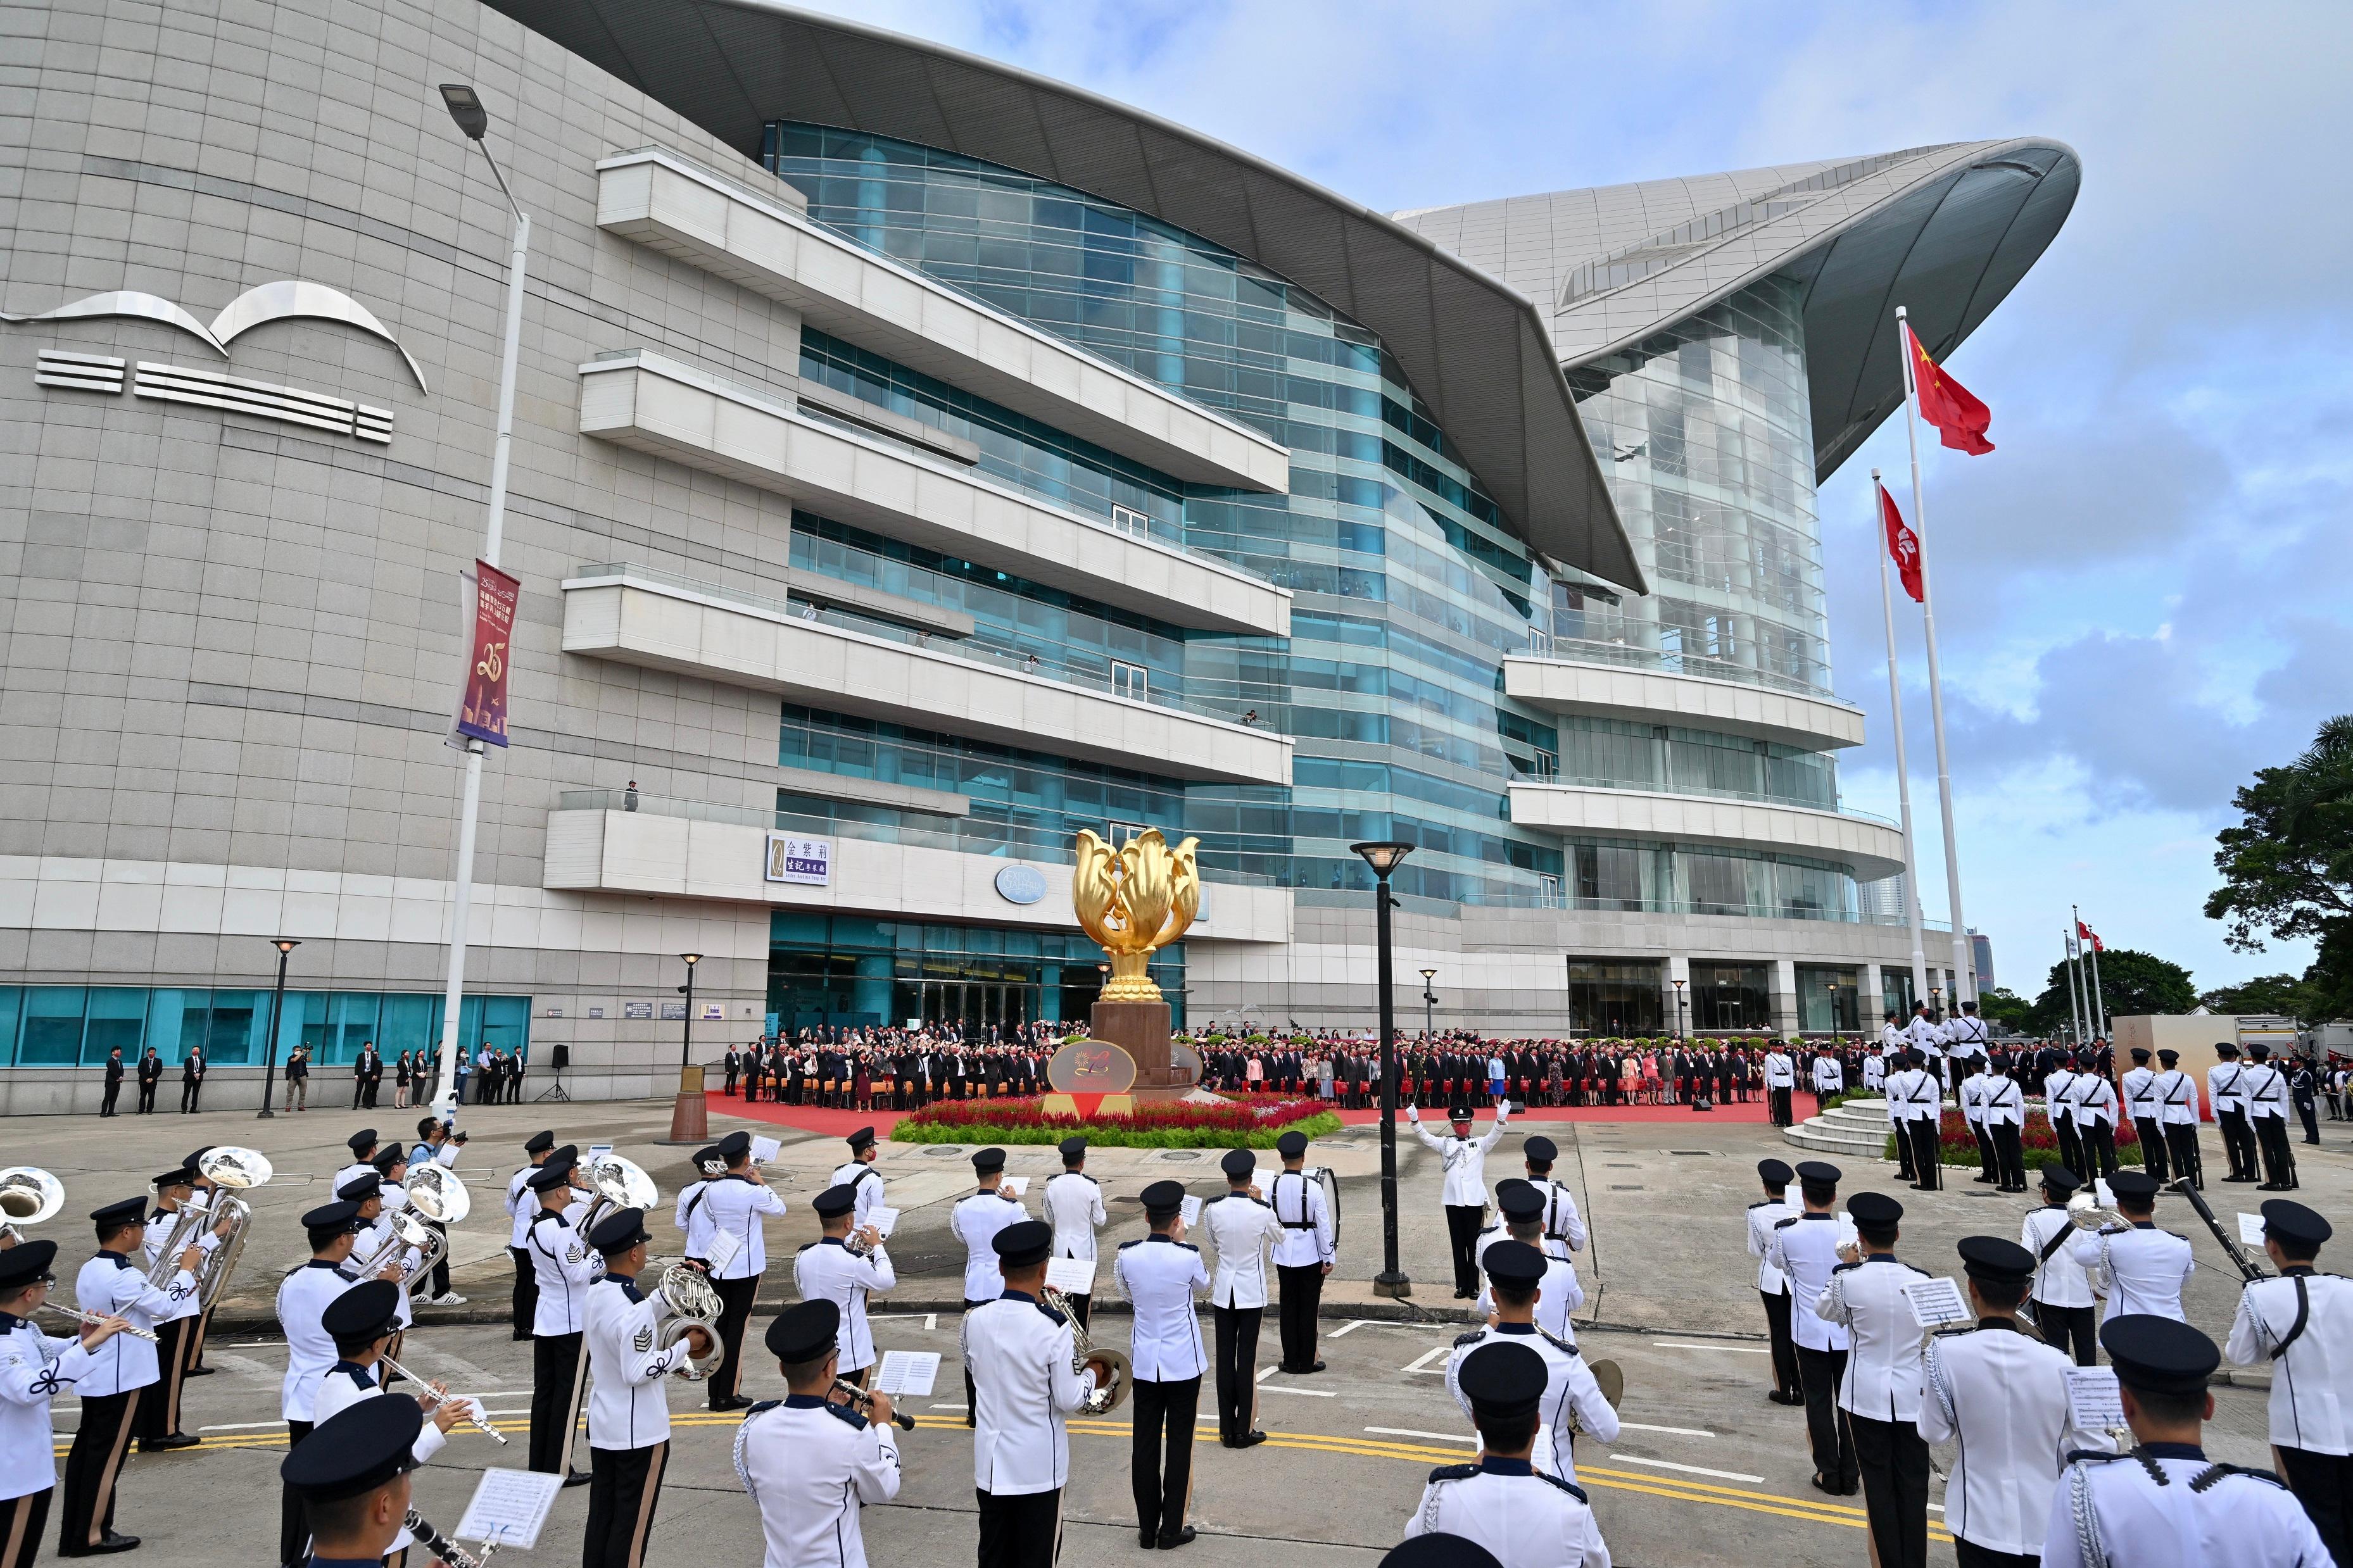 The Chief Executive, Mr John Lee, together with Principal Officials and guests, attends the flag-raising ceremony for the 73rd anniversary of the founding of the People's Republic of China at Golden Bauhinia Square in Wan Chai this morning (October 1).